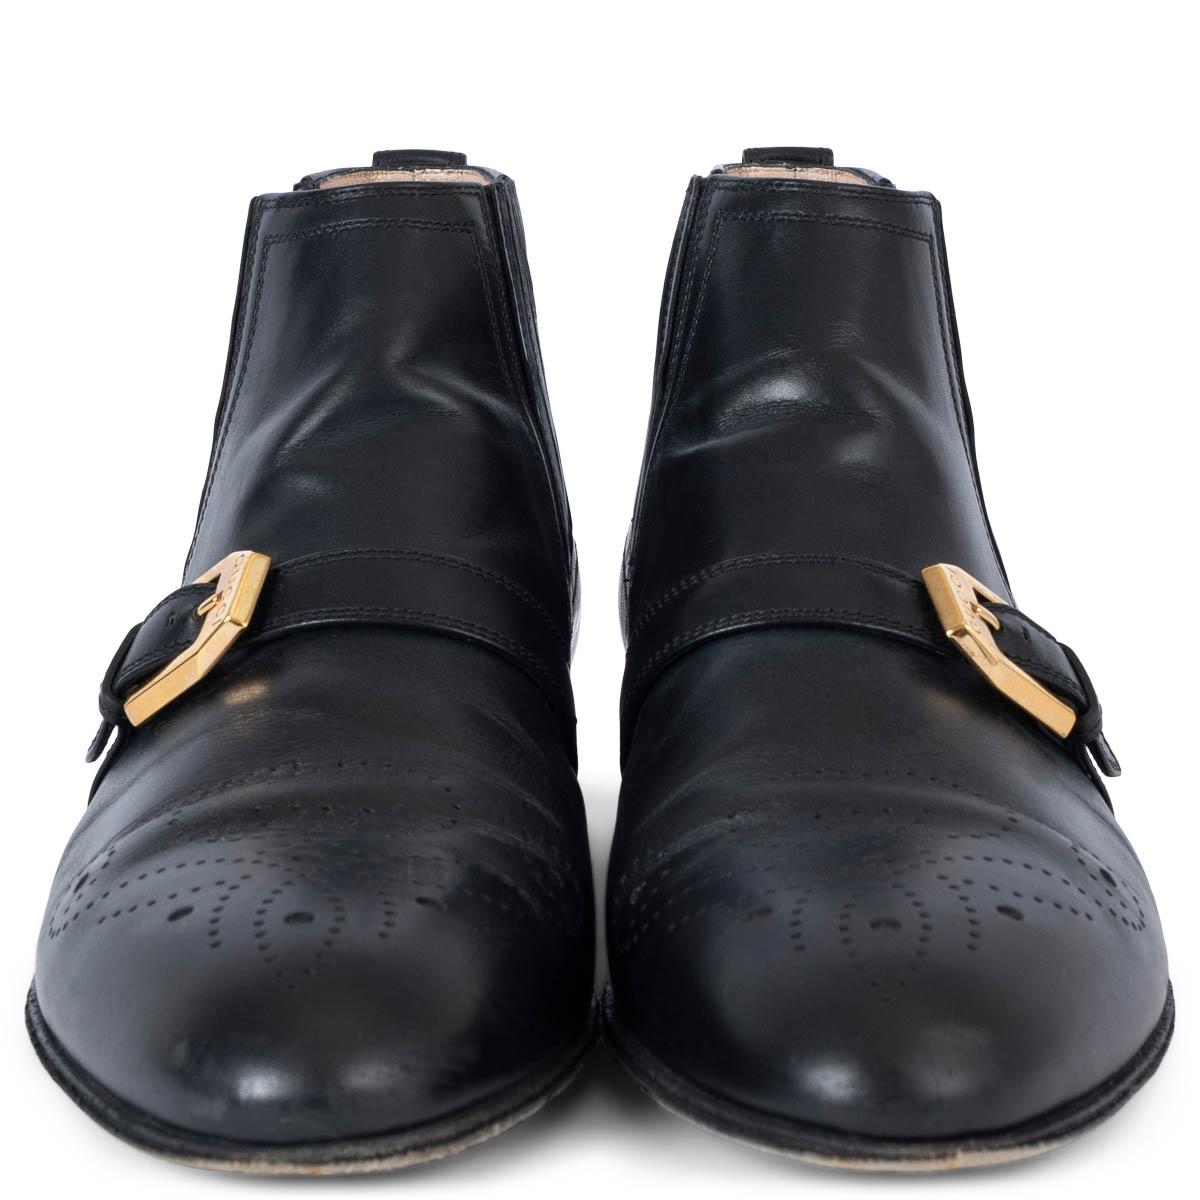 100% authentic Gucci G brogue ankle boots in black smooth leather with elastic panels on the side and pull tab at rear. Have been worn and are in excellent condition. Come with dust bag. 

2019 Pre-Fall

Measurements
Imprinted Size	38.5
Shoe